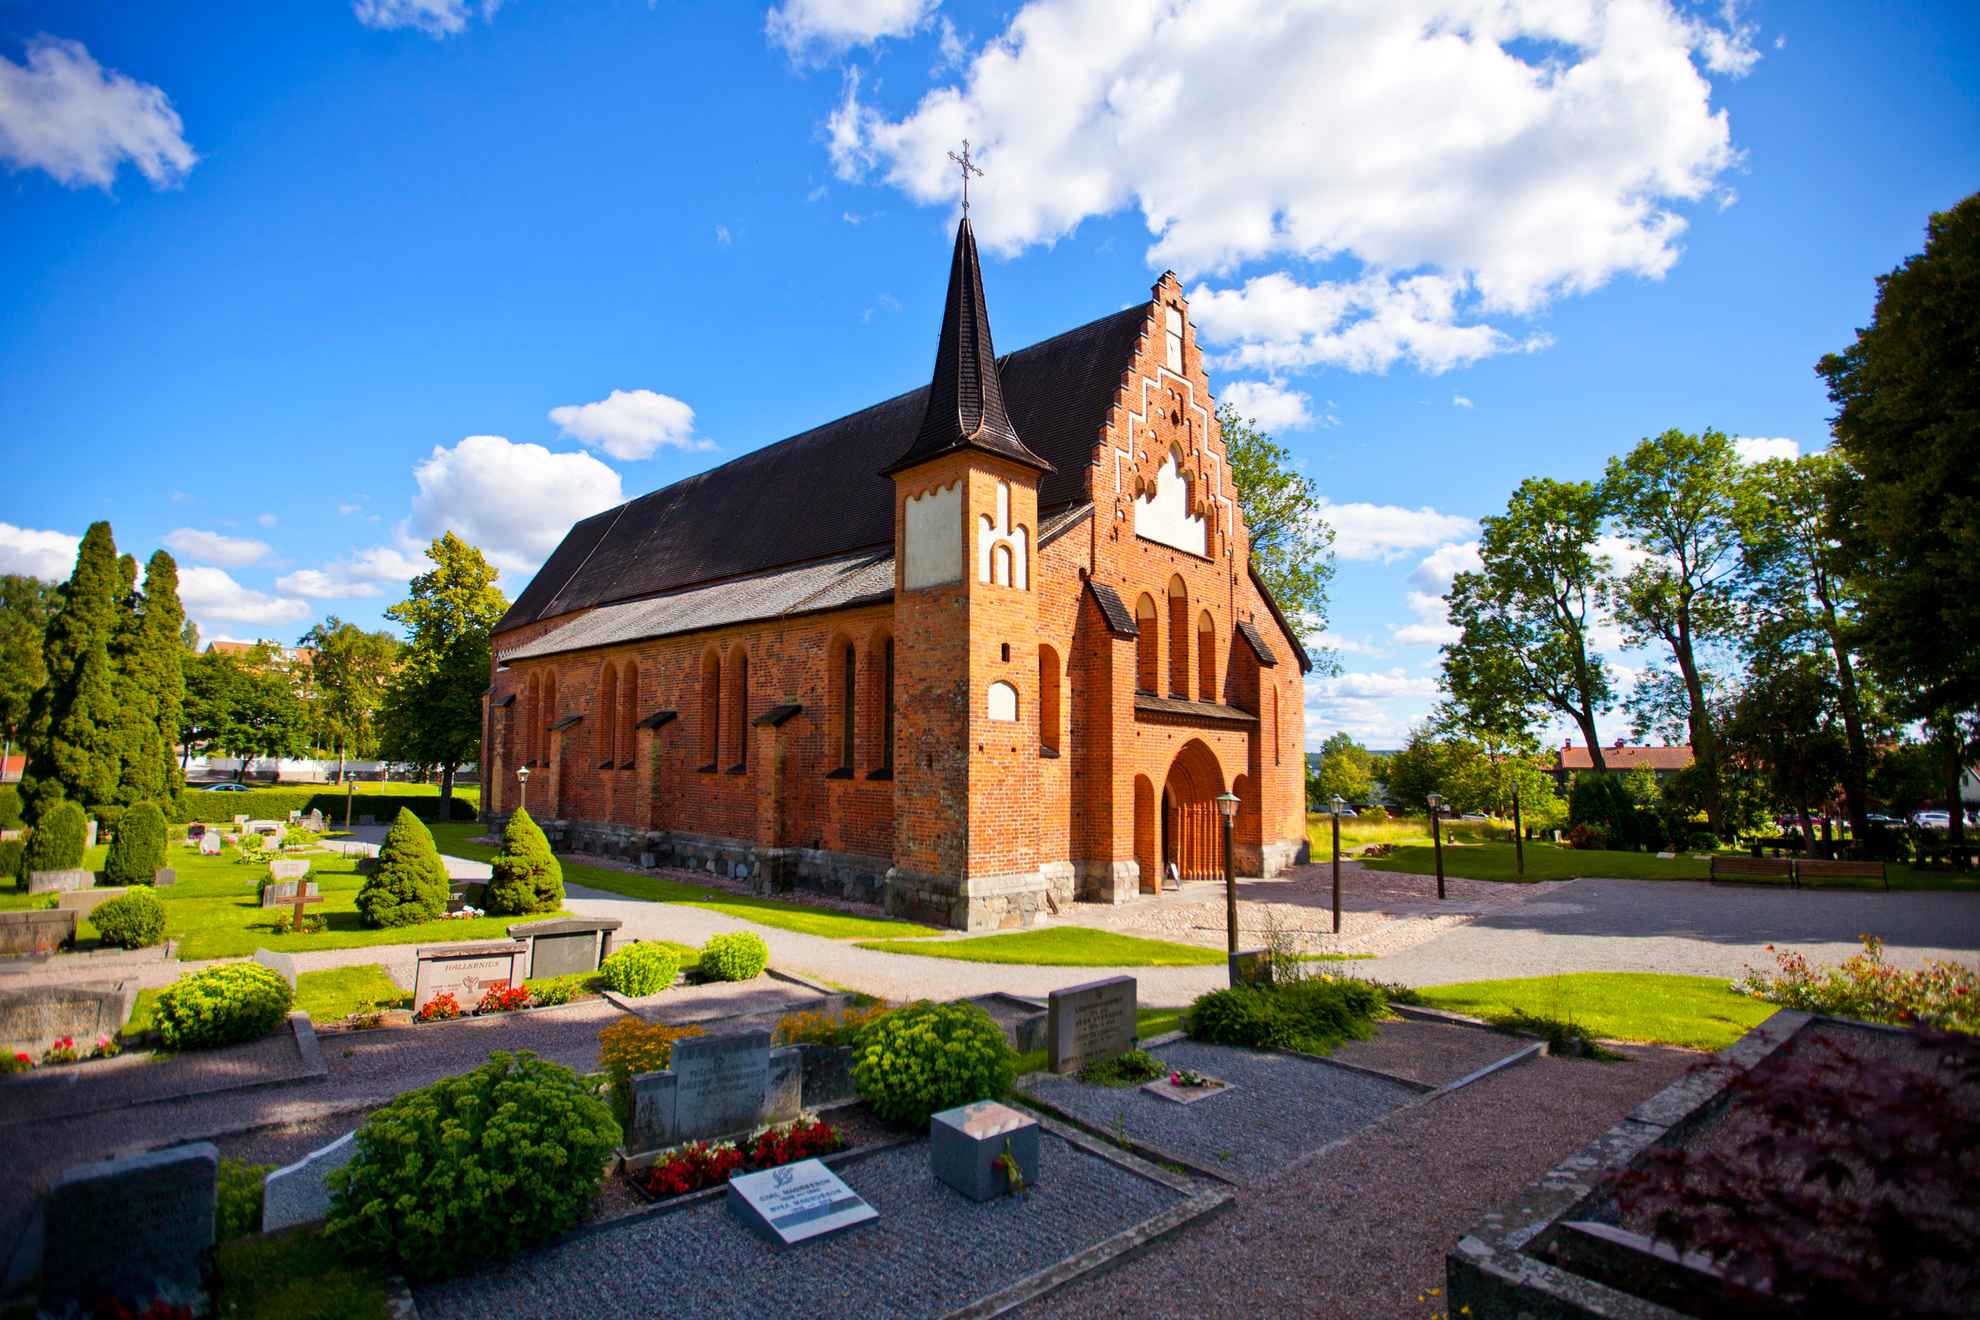 St. Mary's Church in Sigtuna on a sunny day.